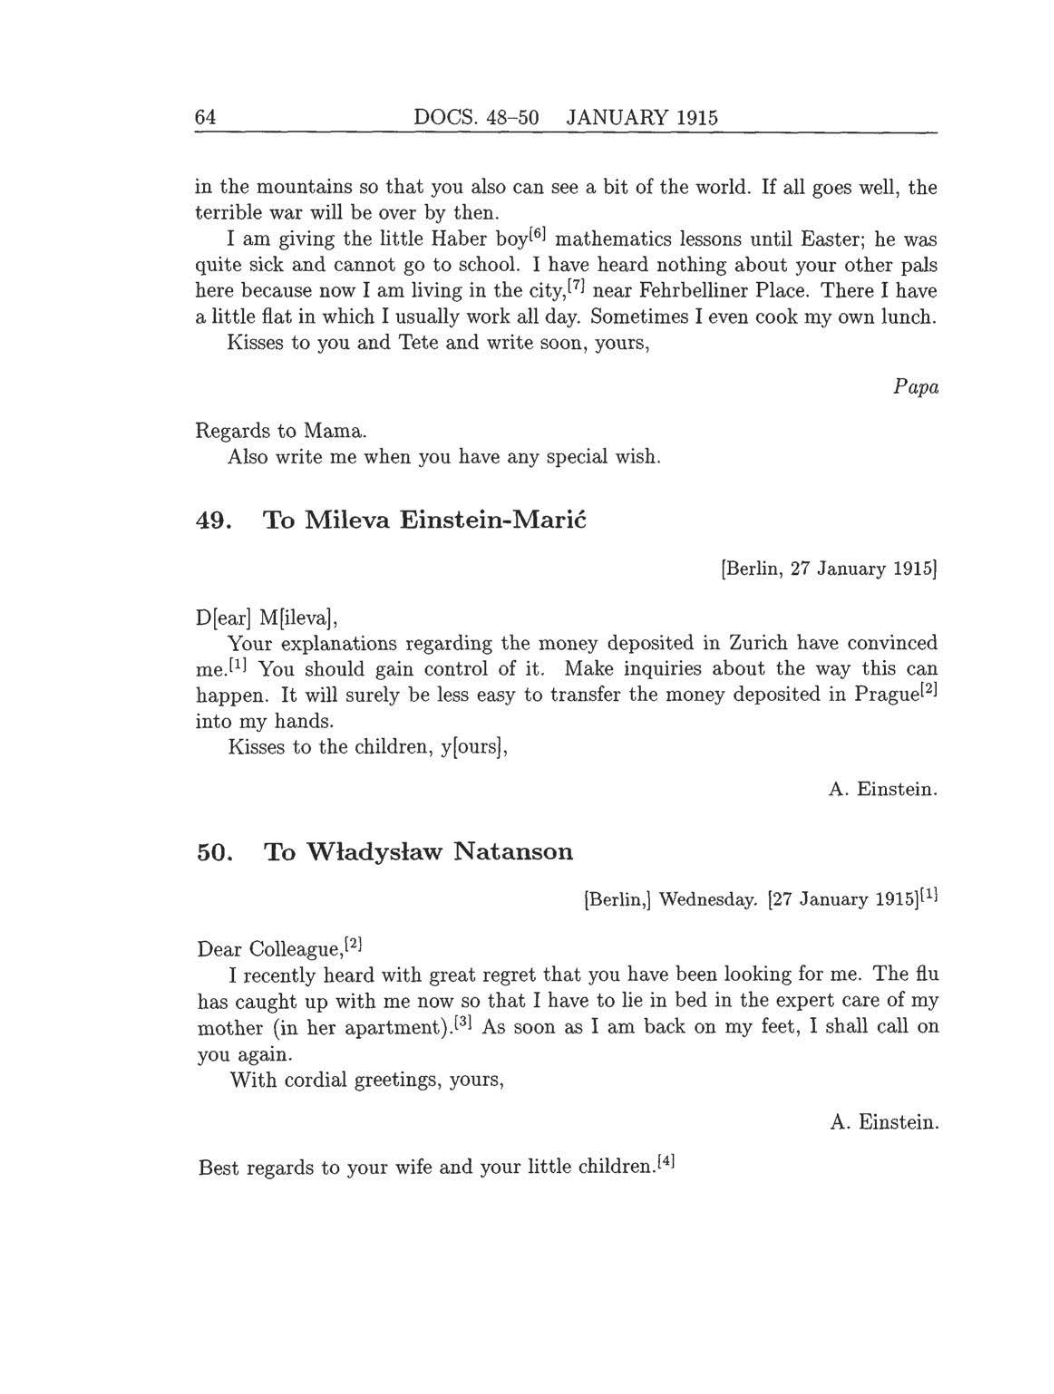 Volume 8: The Berlin Years: Correspondence, 1914-1918 (English translation supplement) page 64